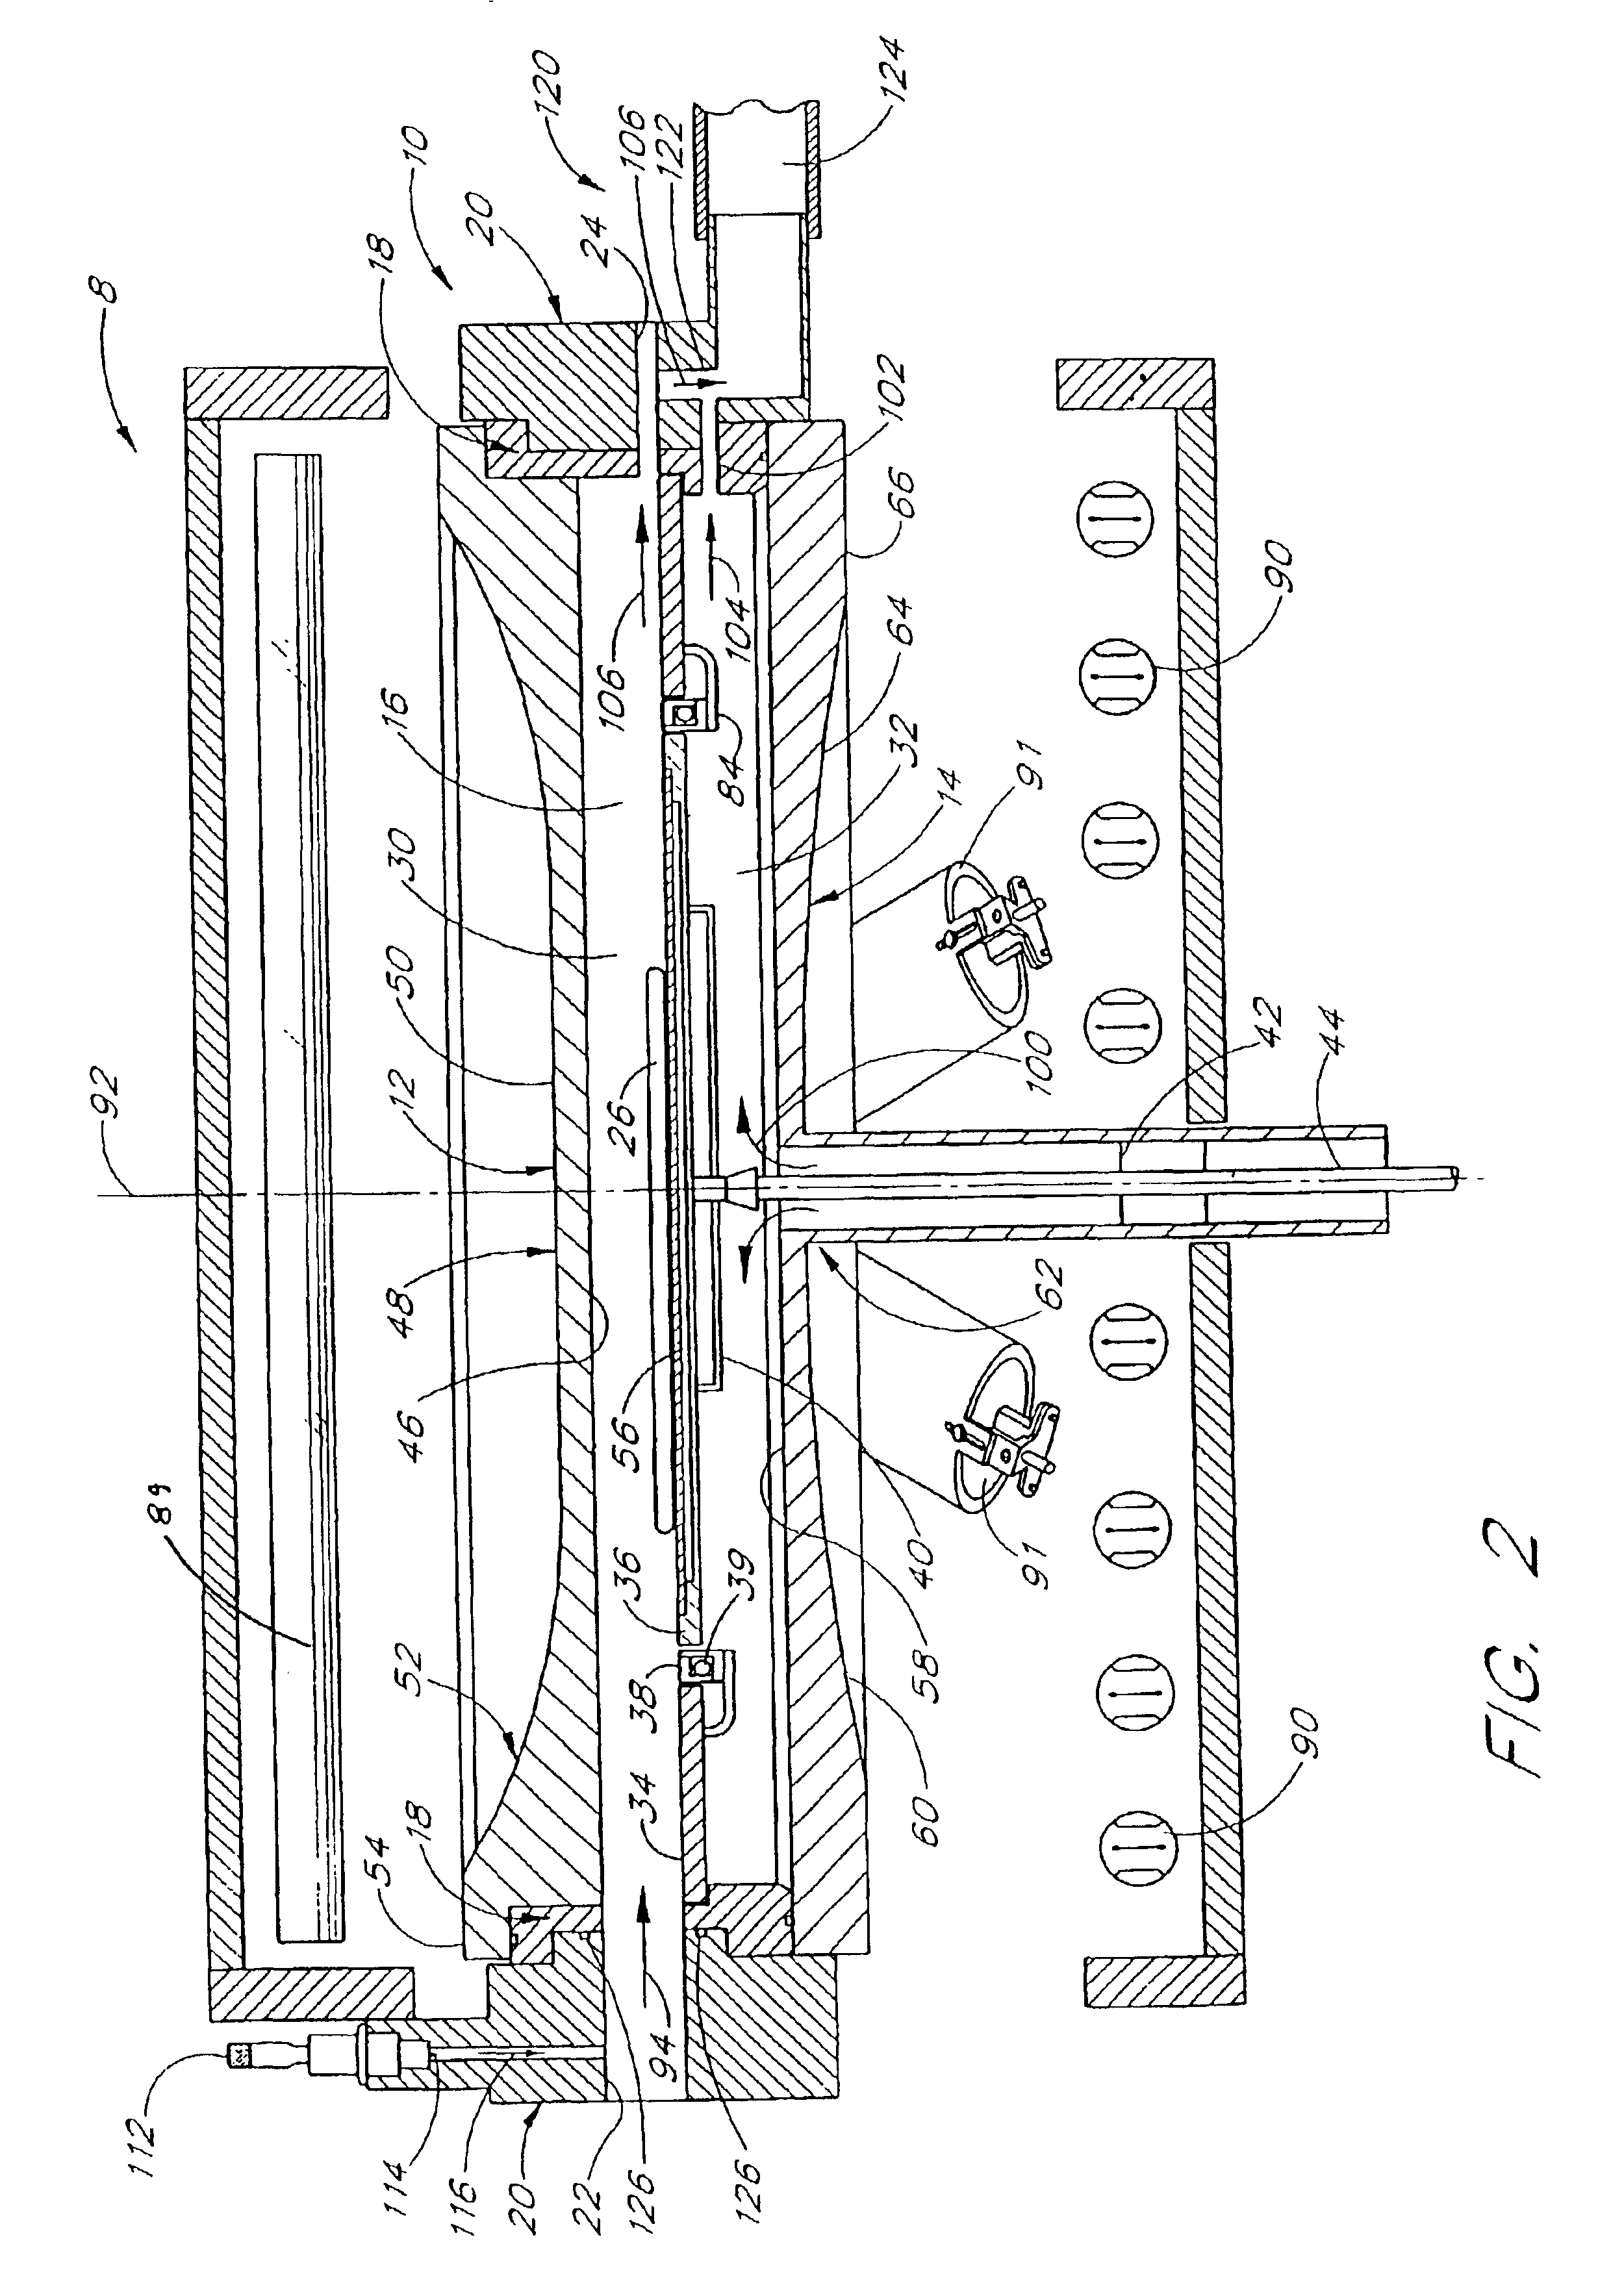 Compact process chamber for improved process uniformity